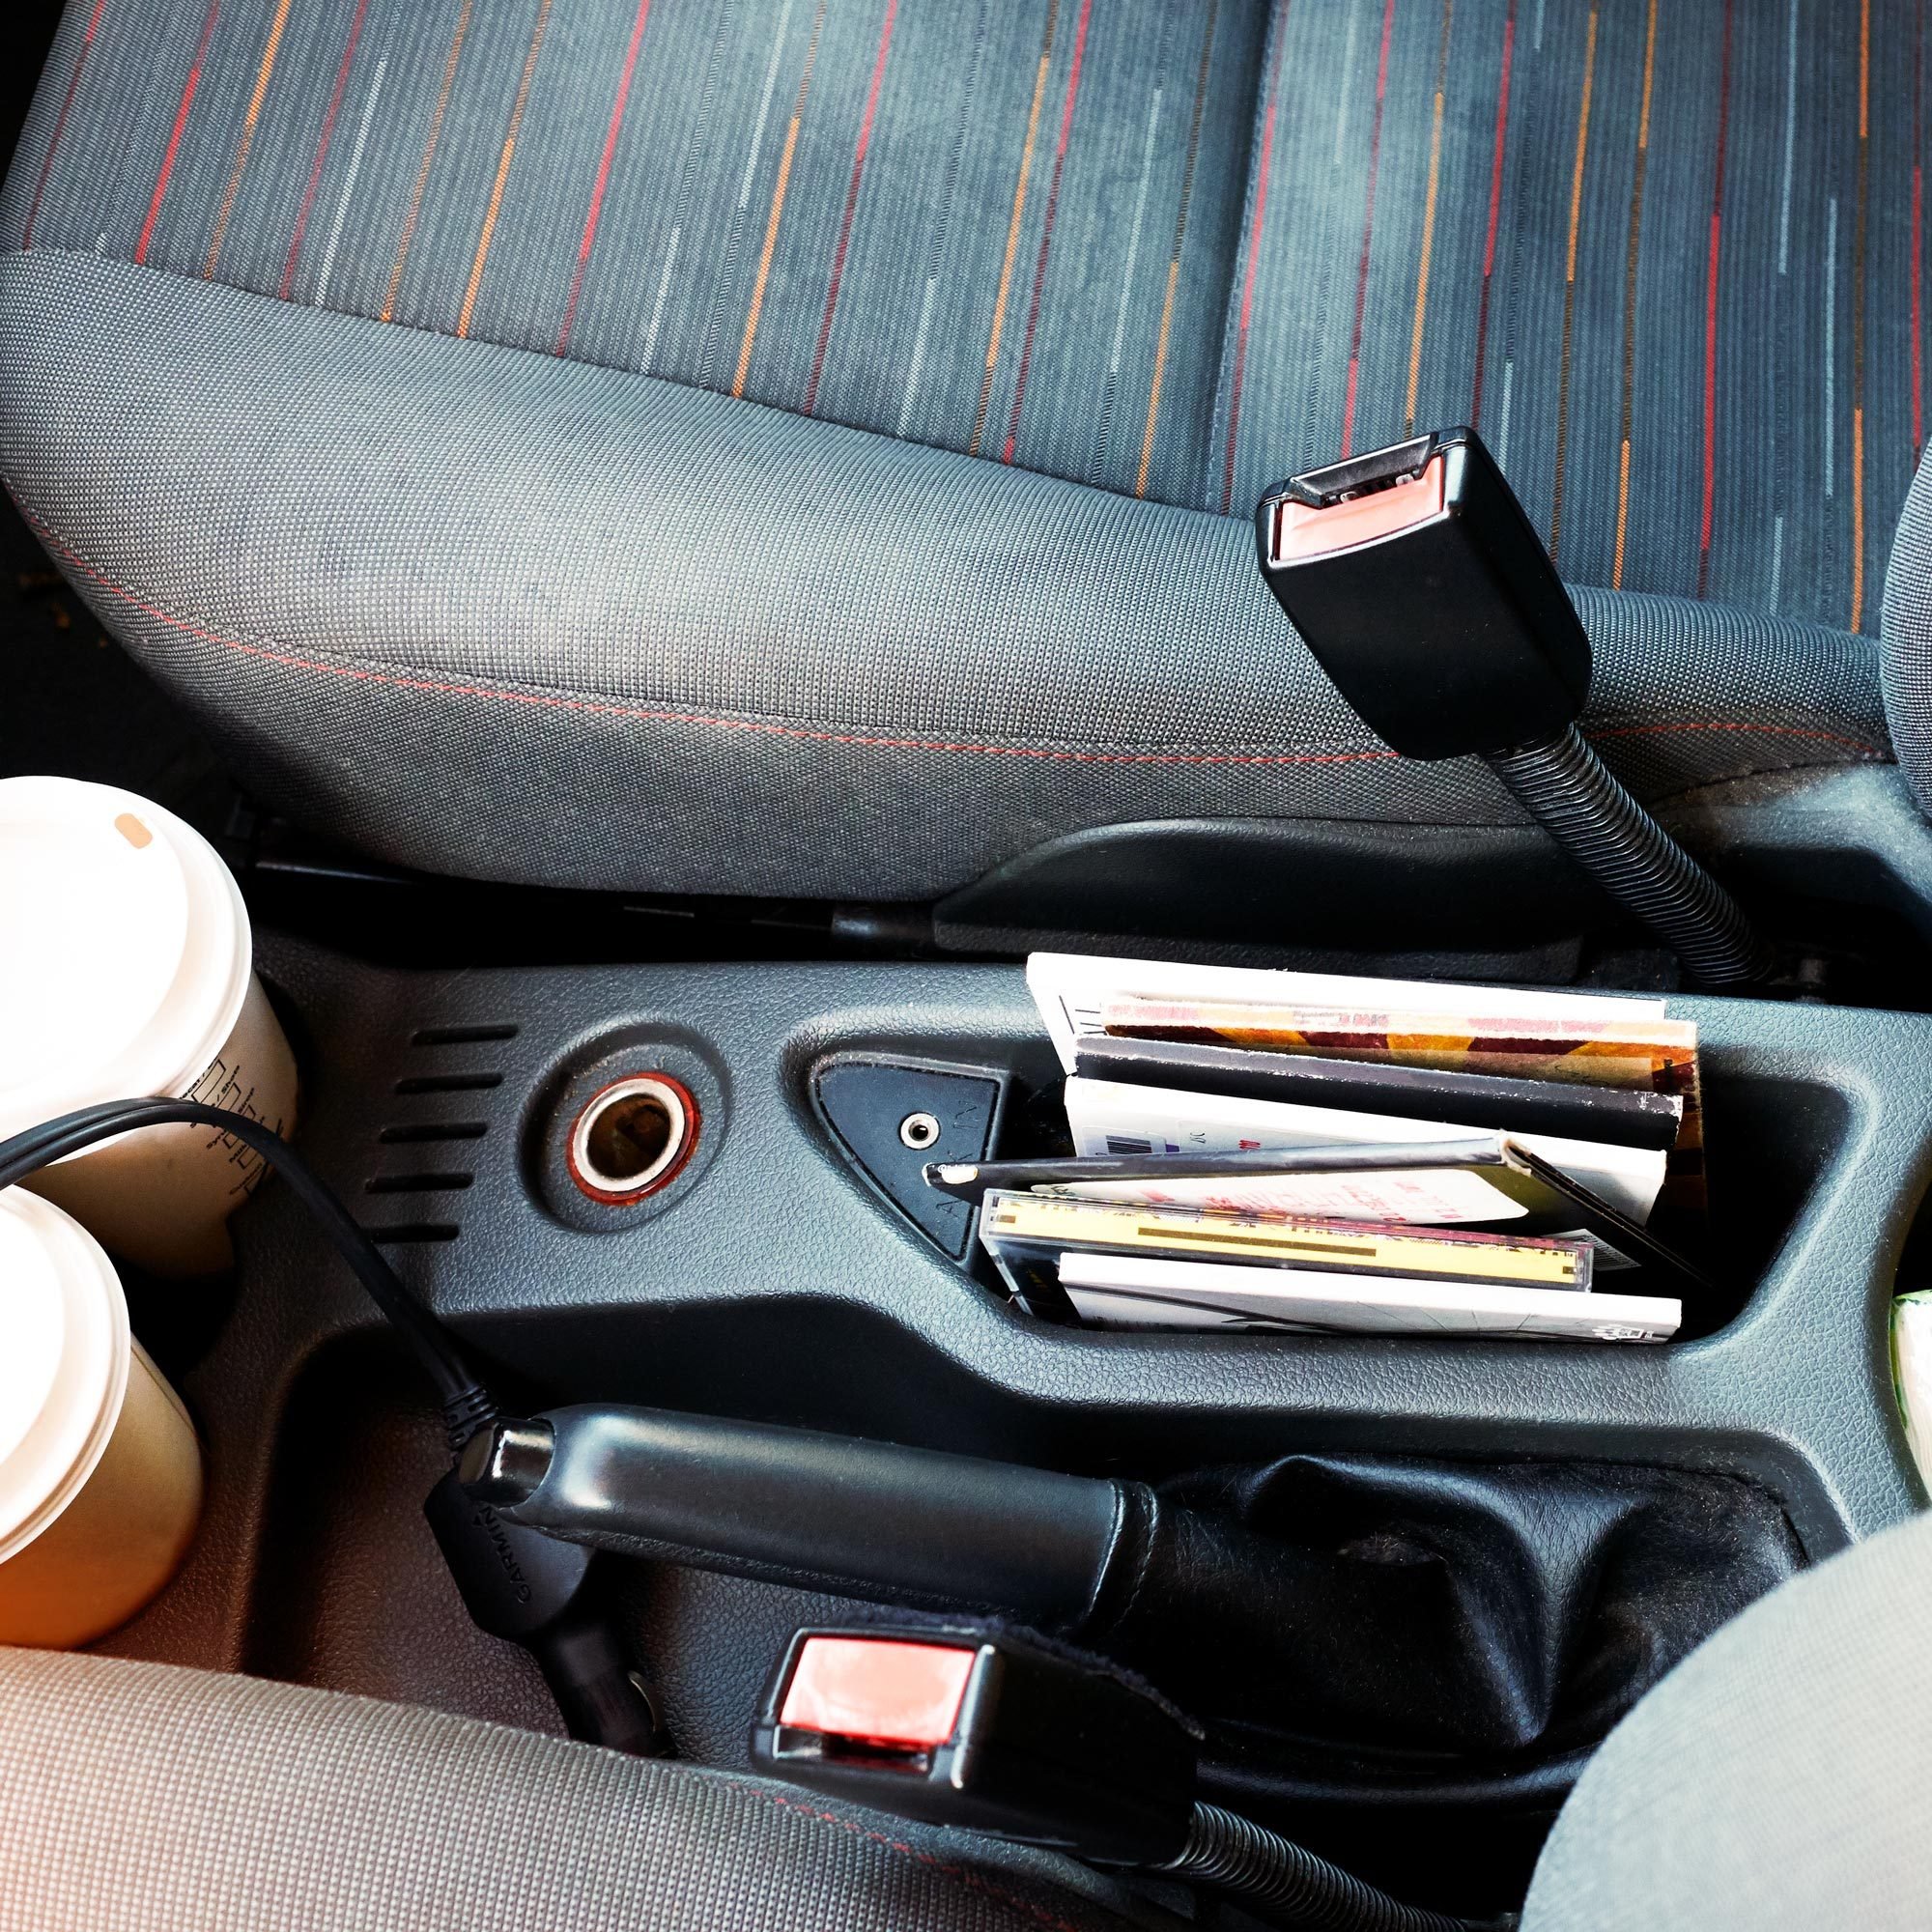 Tips for finding the perfect car interior